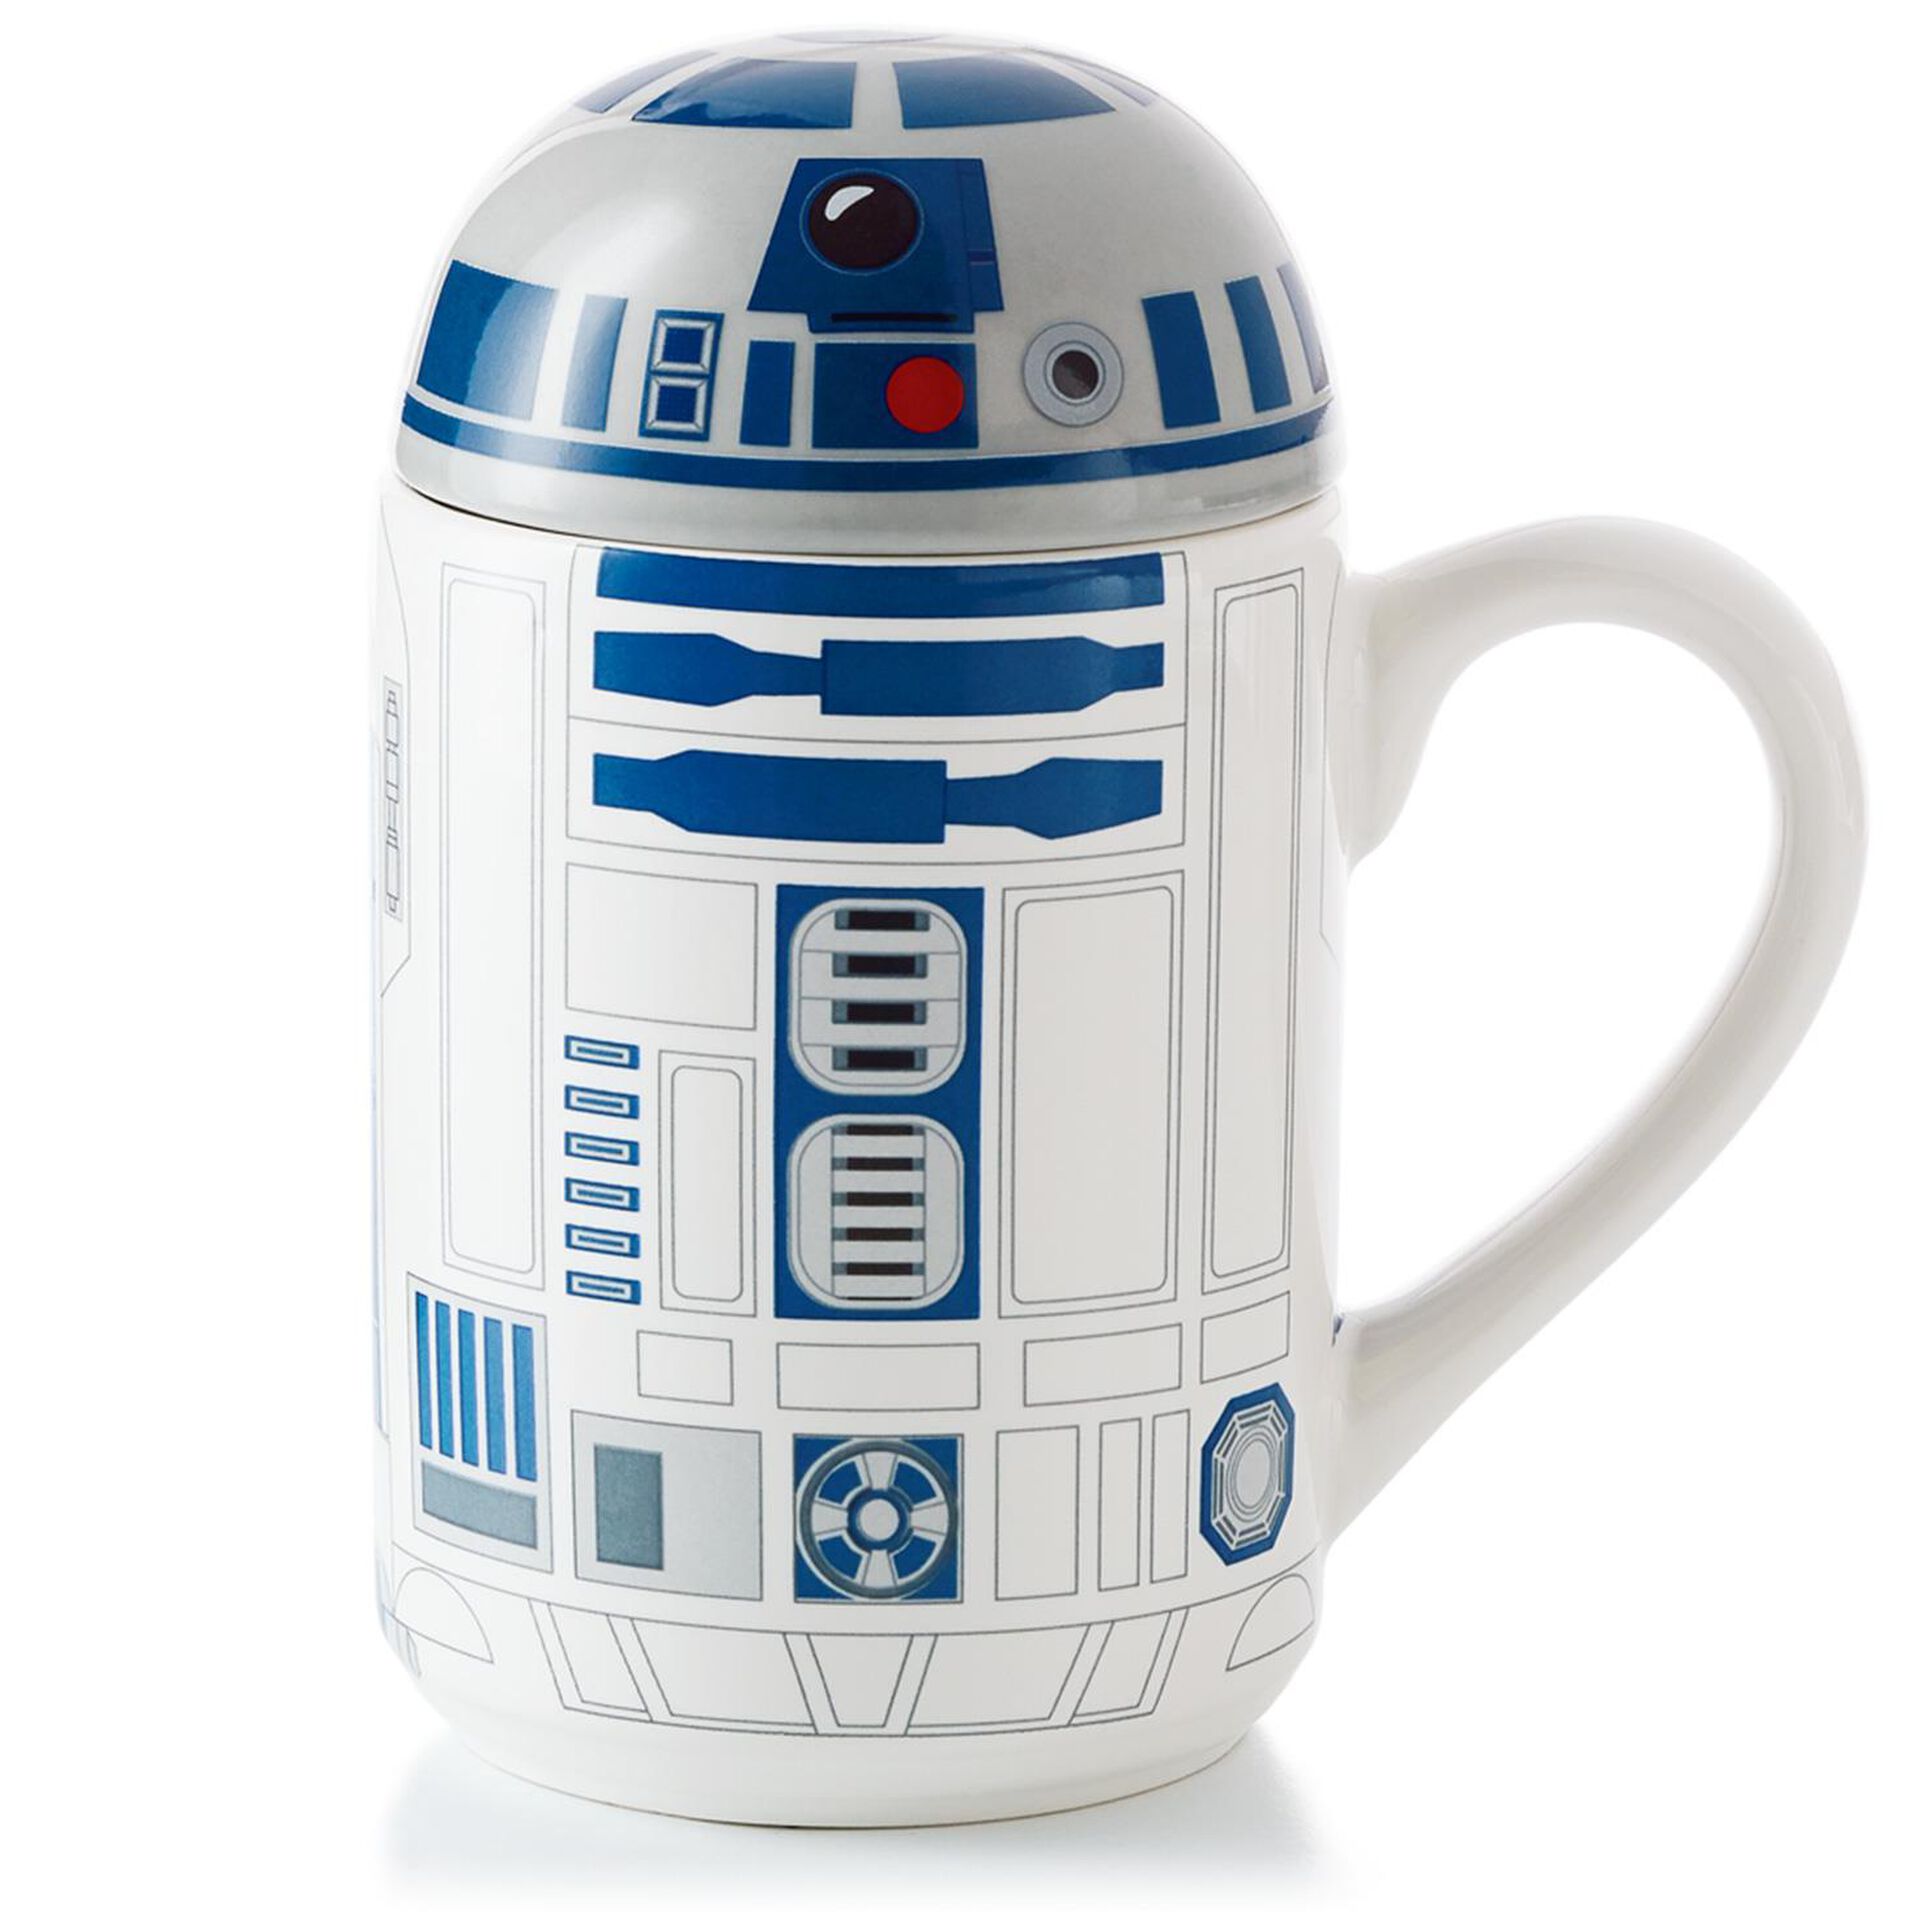 https://www.accesoriosmexicali.com/cdn/shop/products/Star-Wars-R2D2-Mug-With-Sound-root-1SHP1923_SHP1923_01.jpg_Source_Image_2048x2048.jpg?v=1642877470